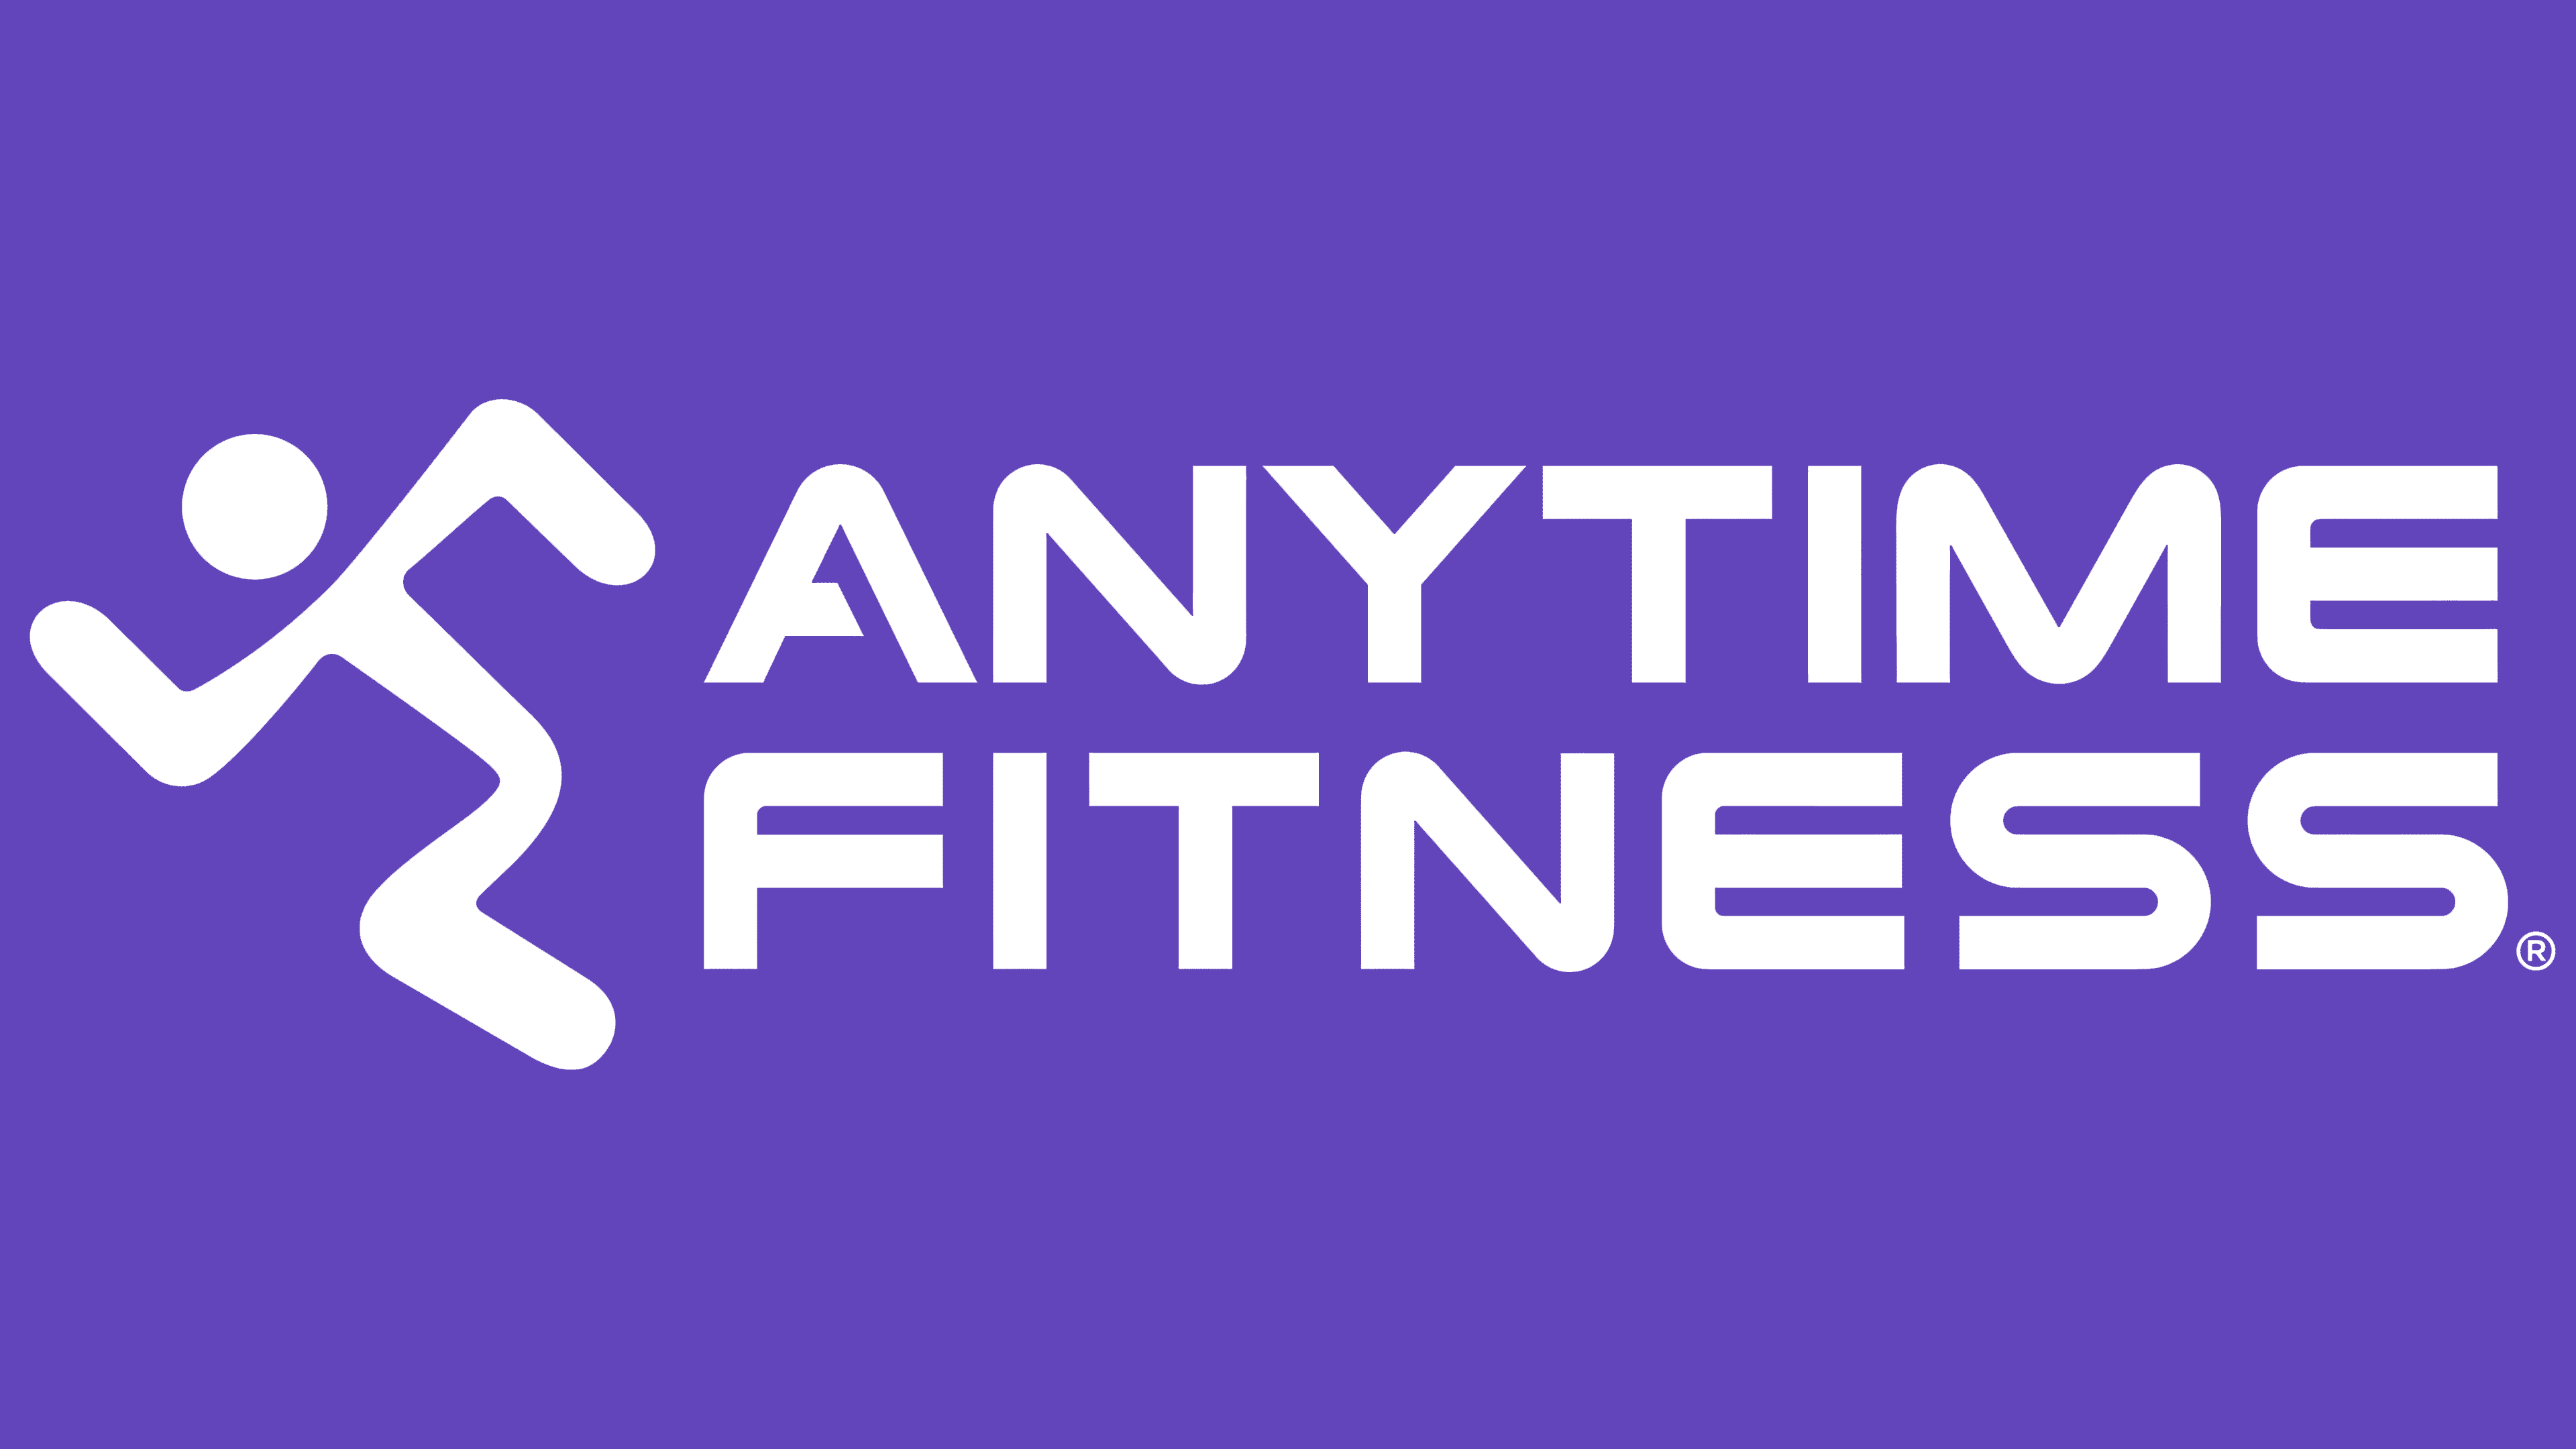 Anytime Fitness Repair Service